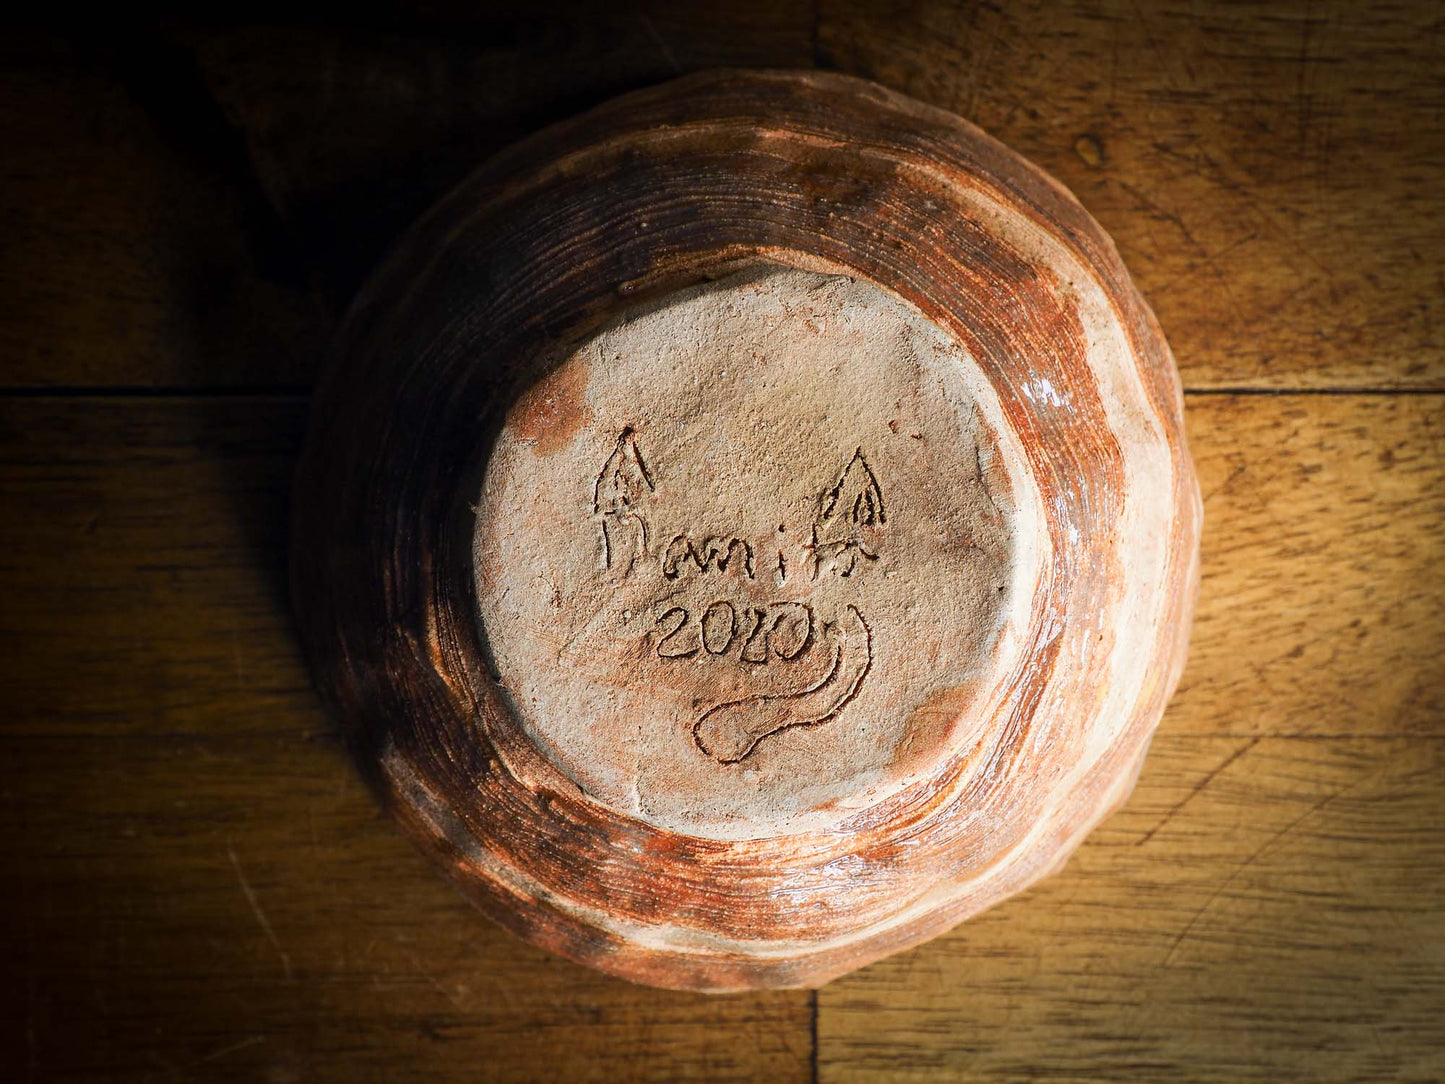 An original Idania Salcido Danita Art pinched ceramic white cat pet food bowl. Handmade from locally foraged clay, this glazed ceramics one of a kind artwork is perfect for any kitchen plate and bowls unique collection. A hand made white cat waits for you at the bottom of this brown pet food bowl.